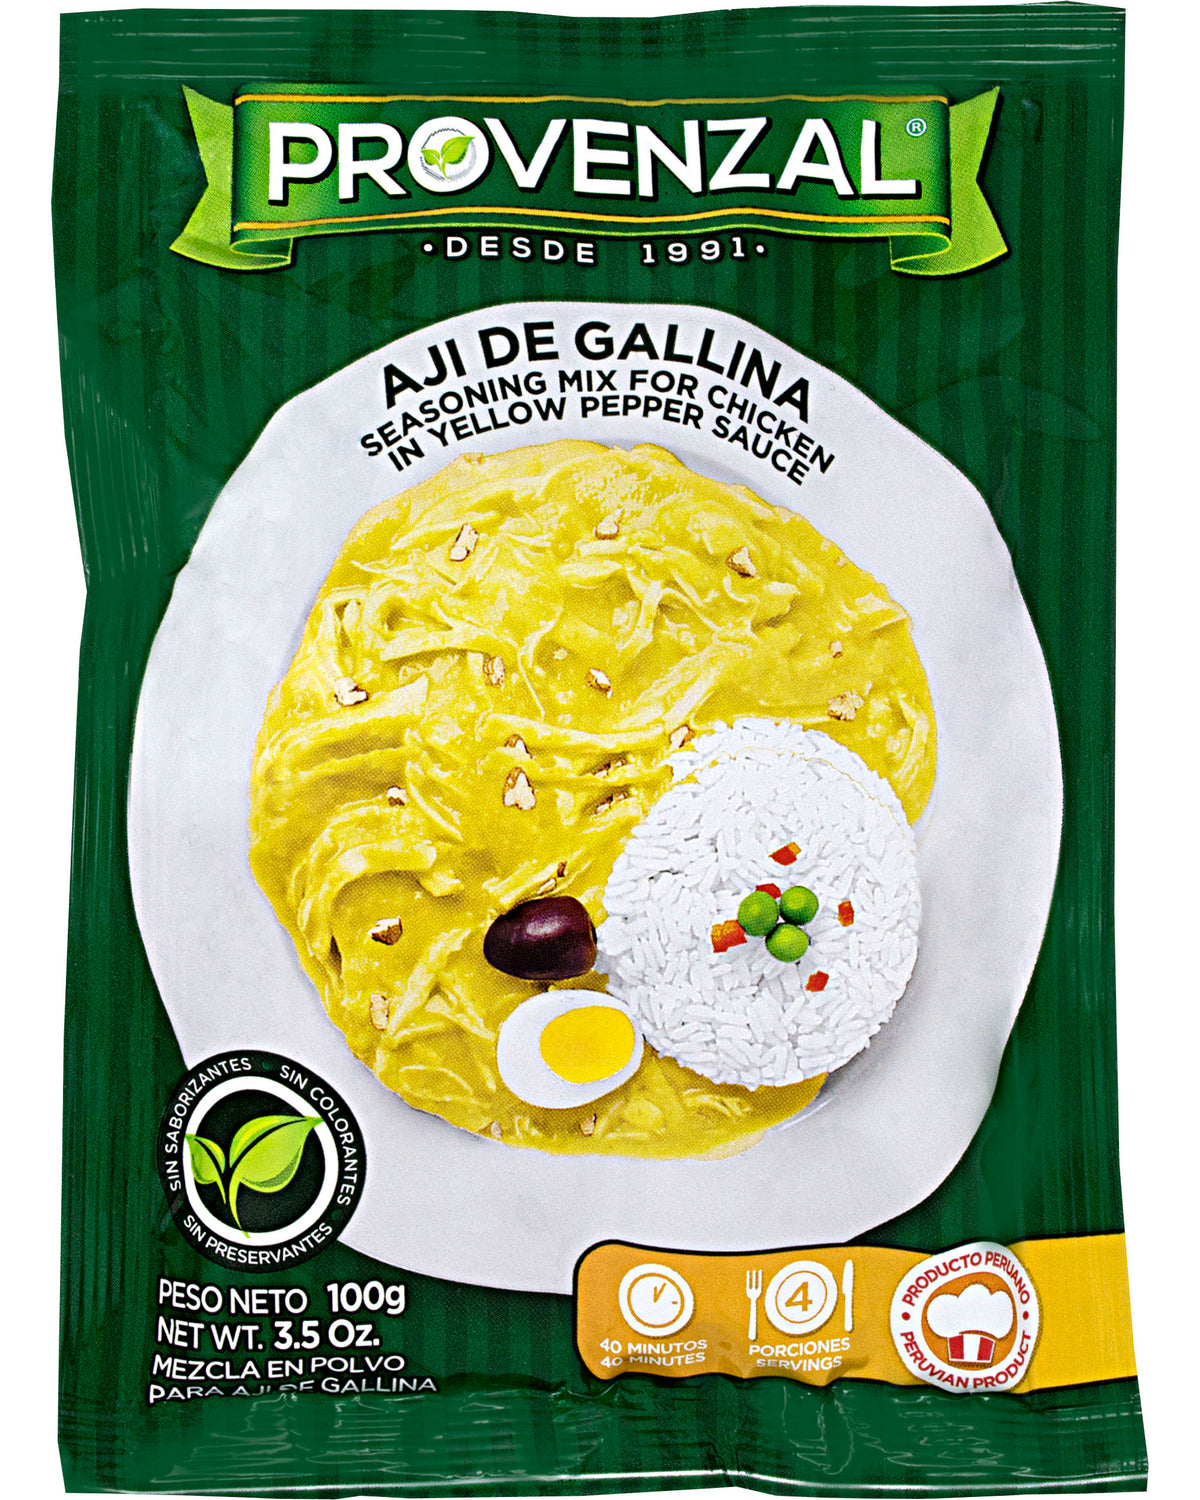 https://www.shopalittletaste.shop/wp-content/uploads/1689/27/provenzal-aji-de-gallina-seasoning-mix-for-chicken-in-yellow-pepper-sauce-3-5-oz-100-g-provenzal-explore-our-exciting-range-of-products_0.jpg